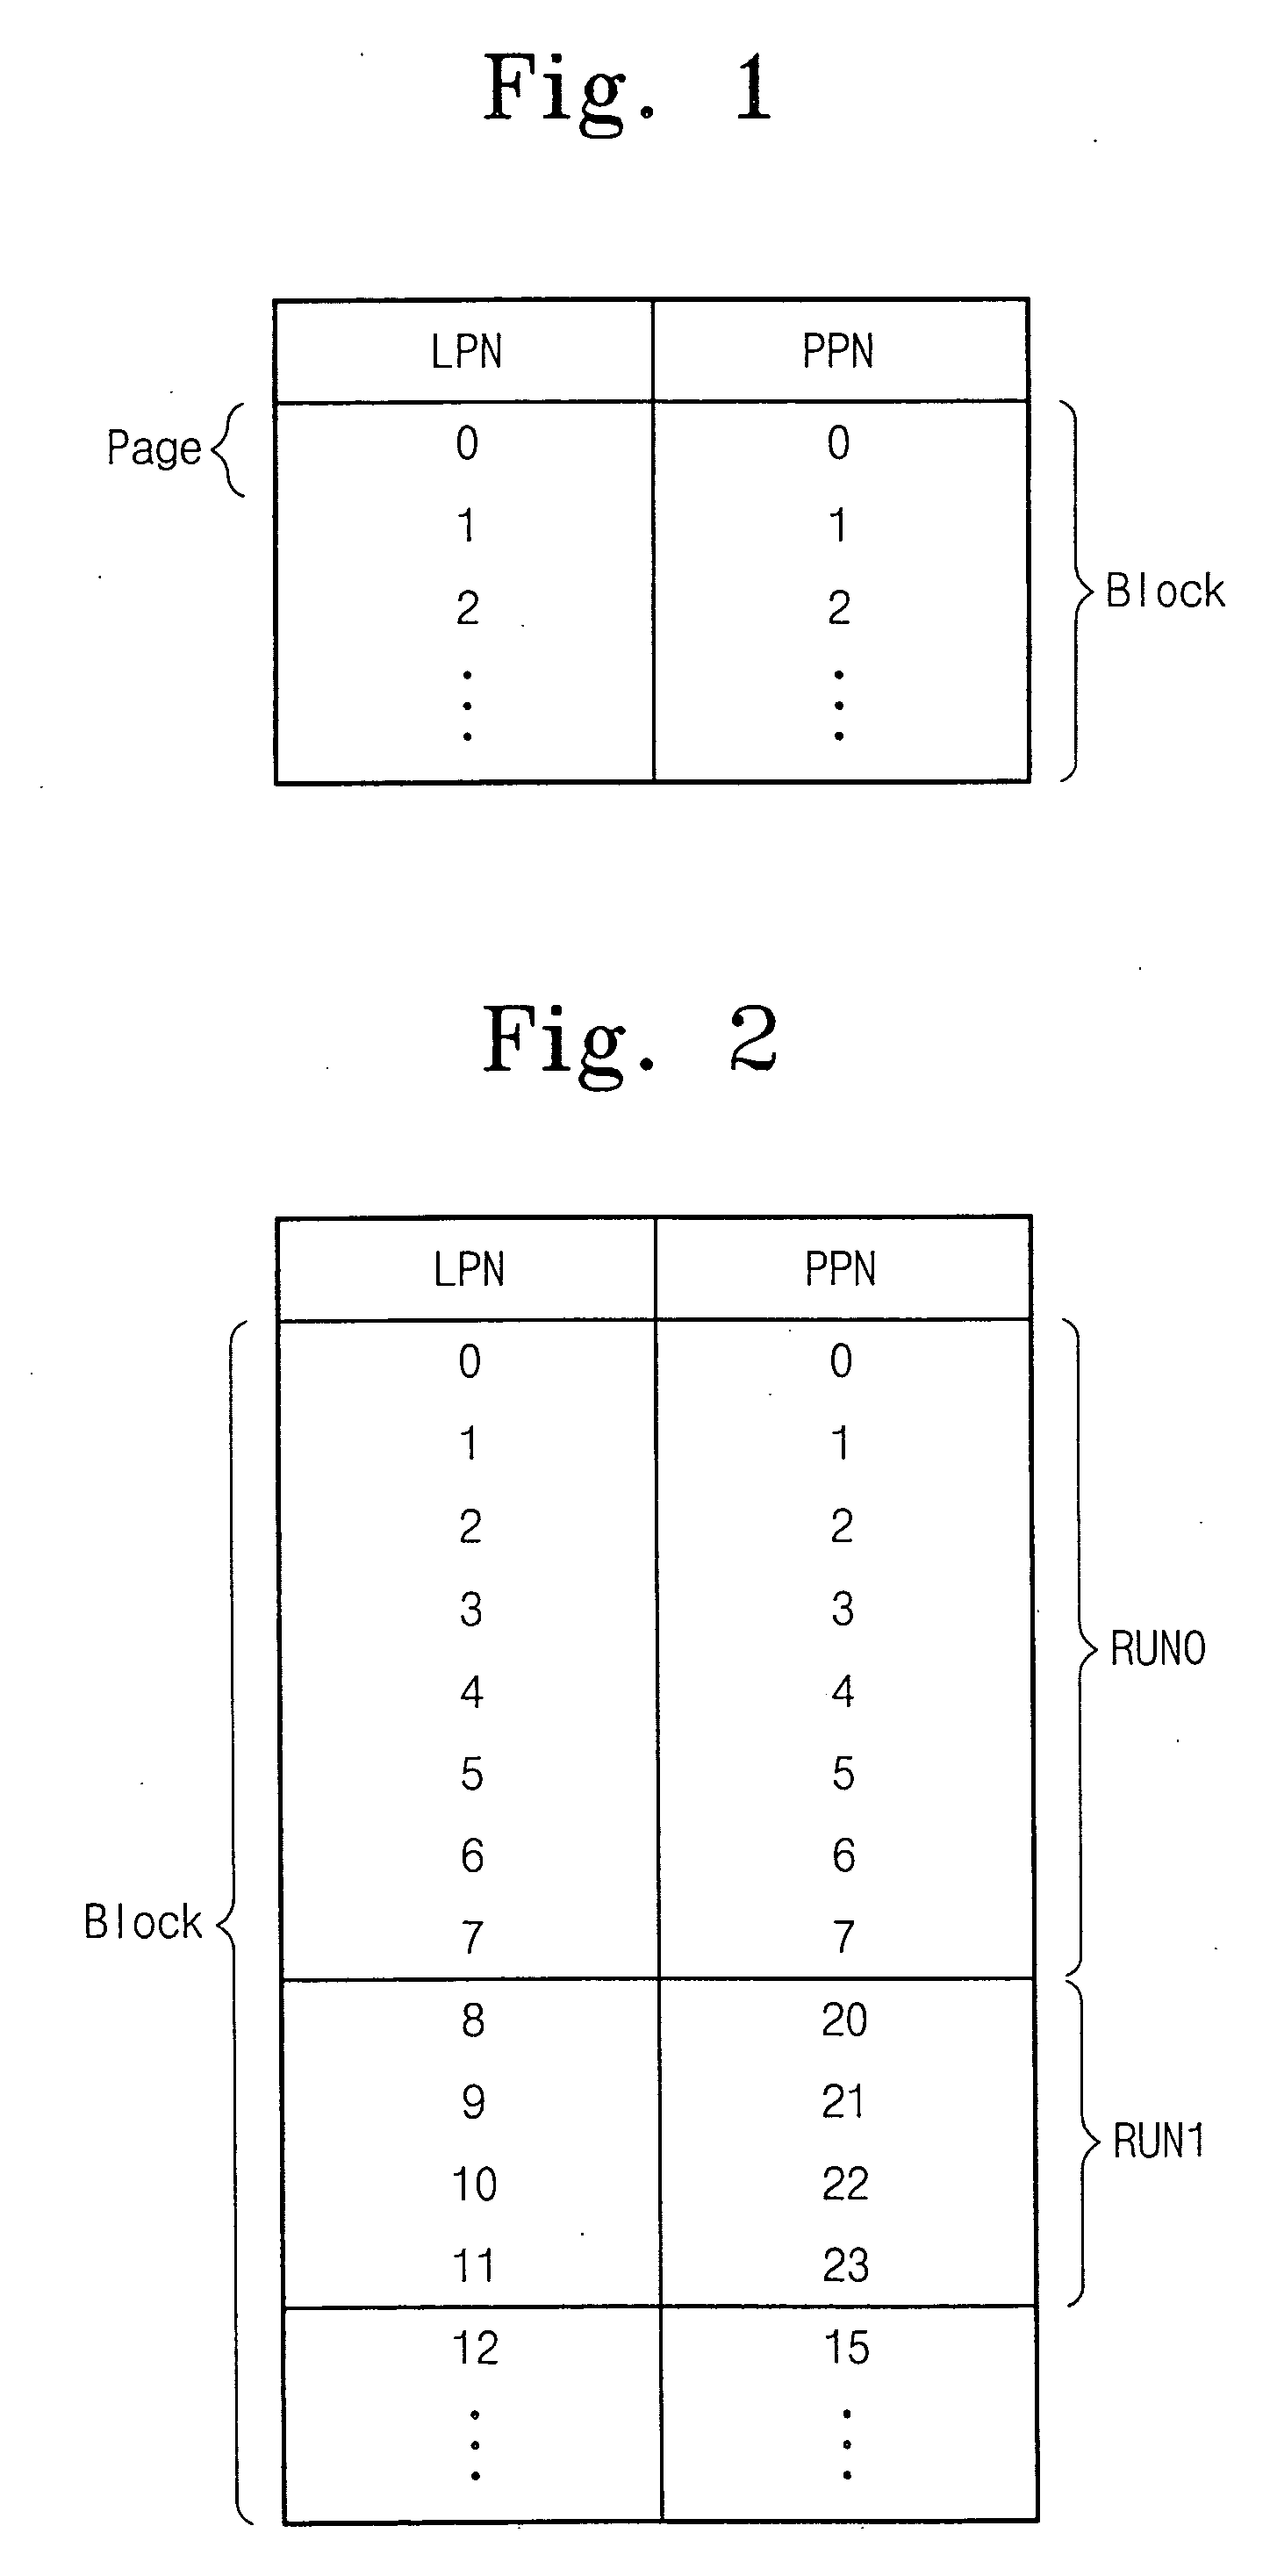 Run level address mapping table and related method of construction